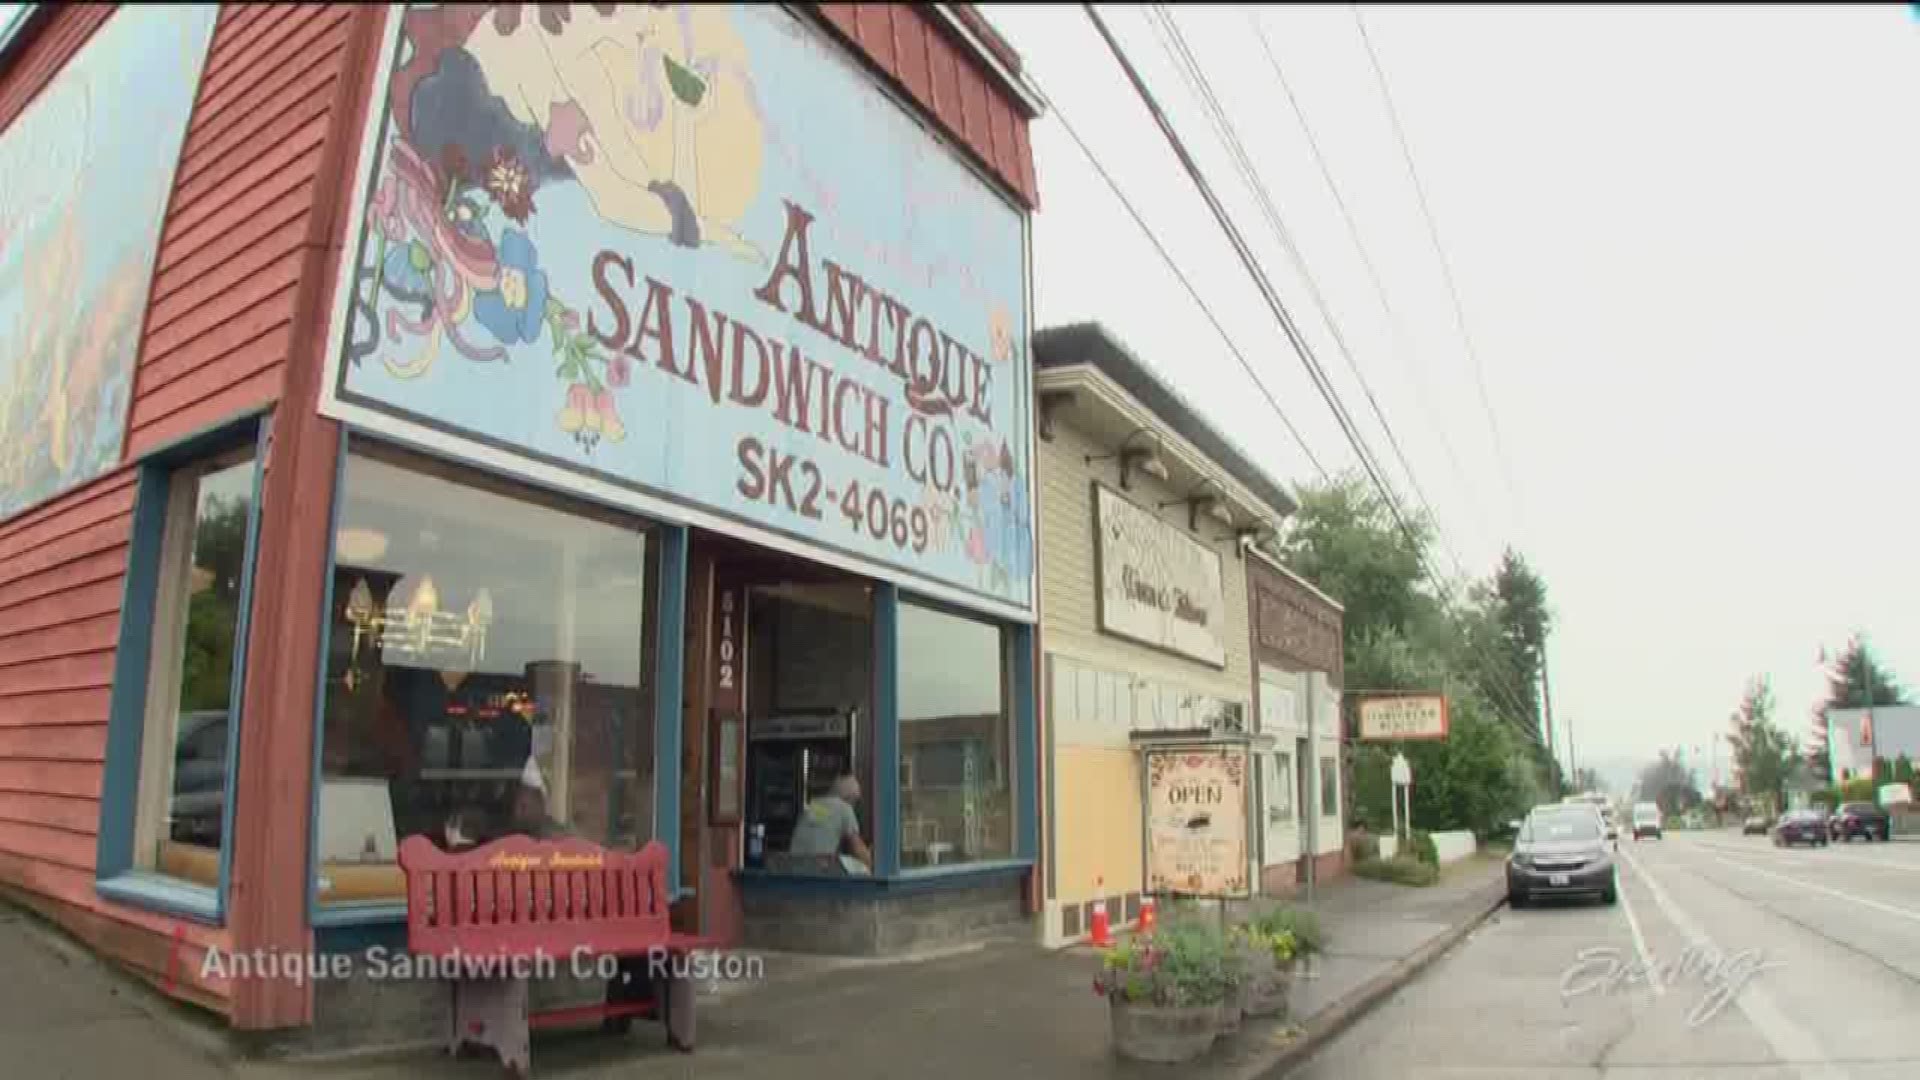 Nostalgic for sprouts and home-baked granola? Visit The Antique Sandwich Company.